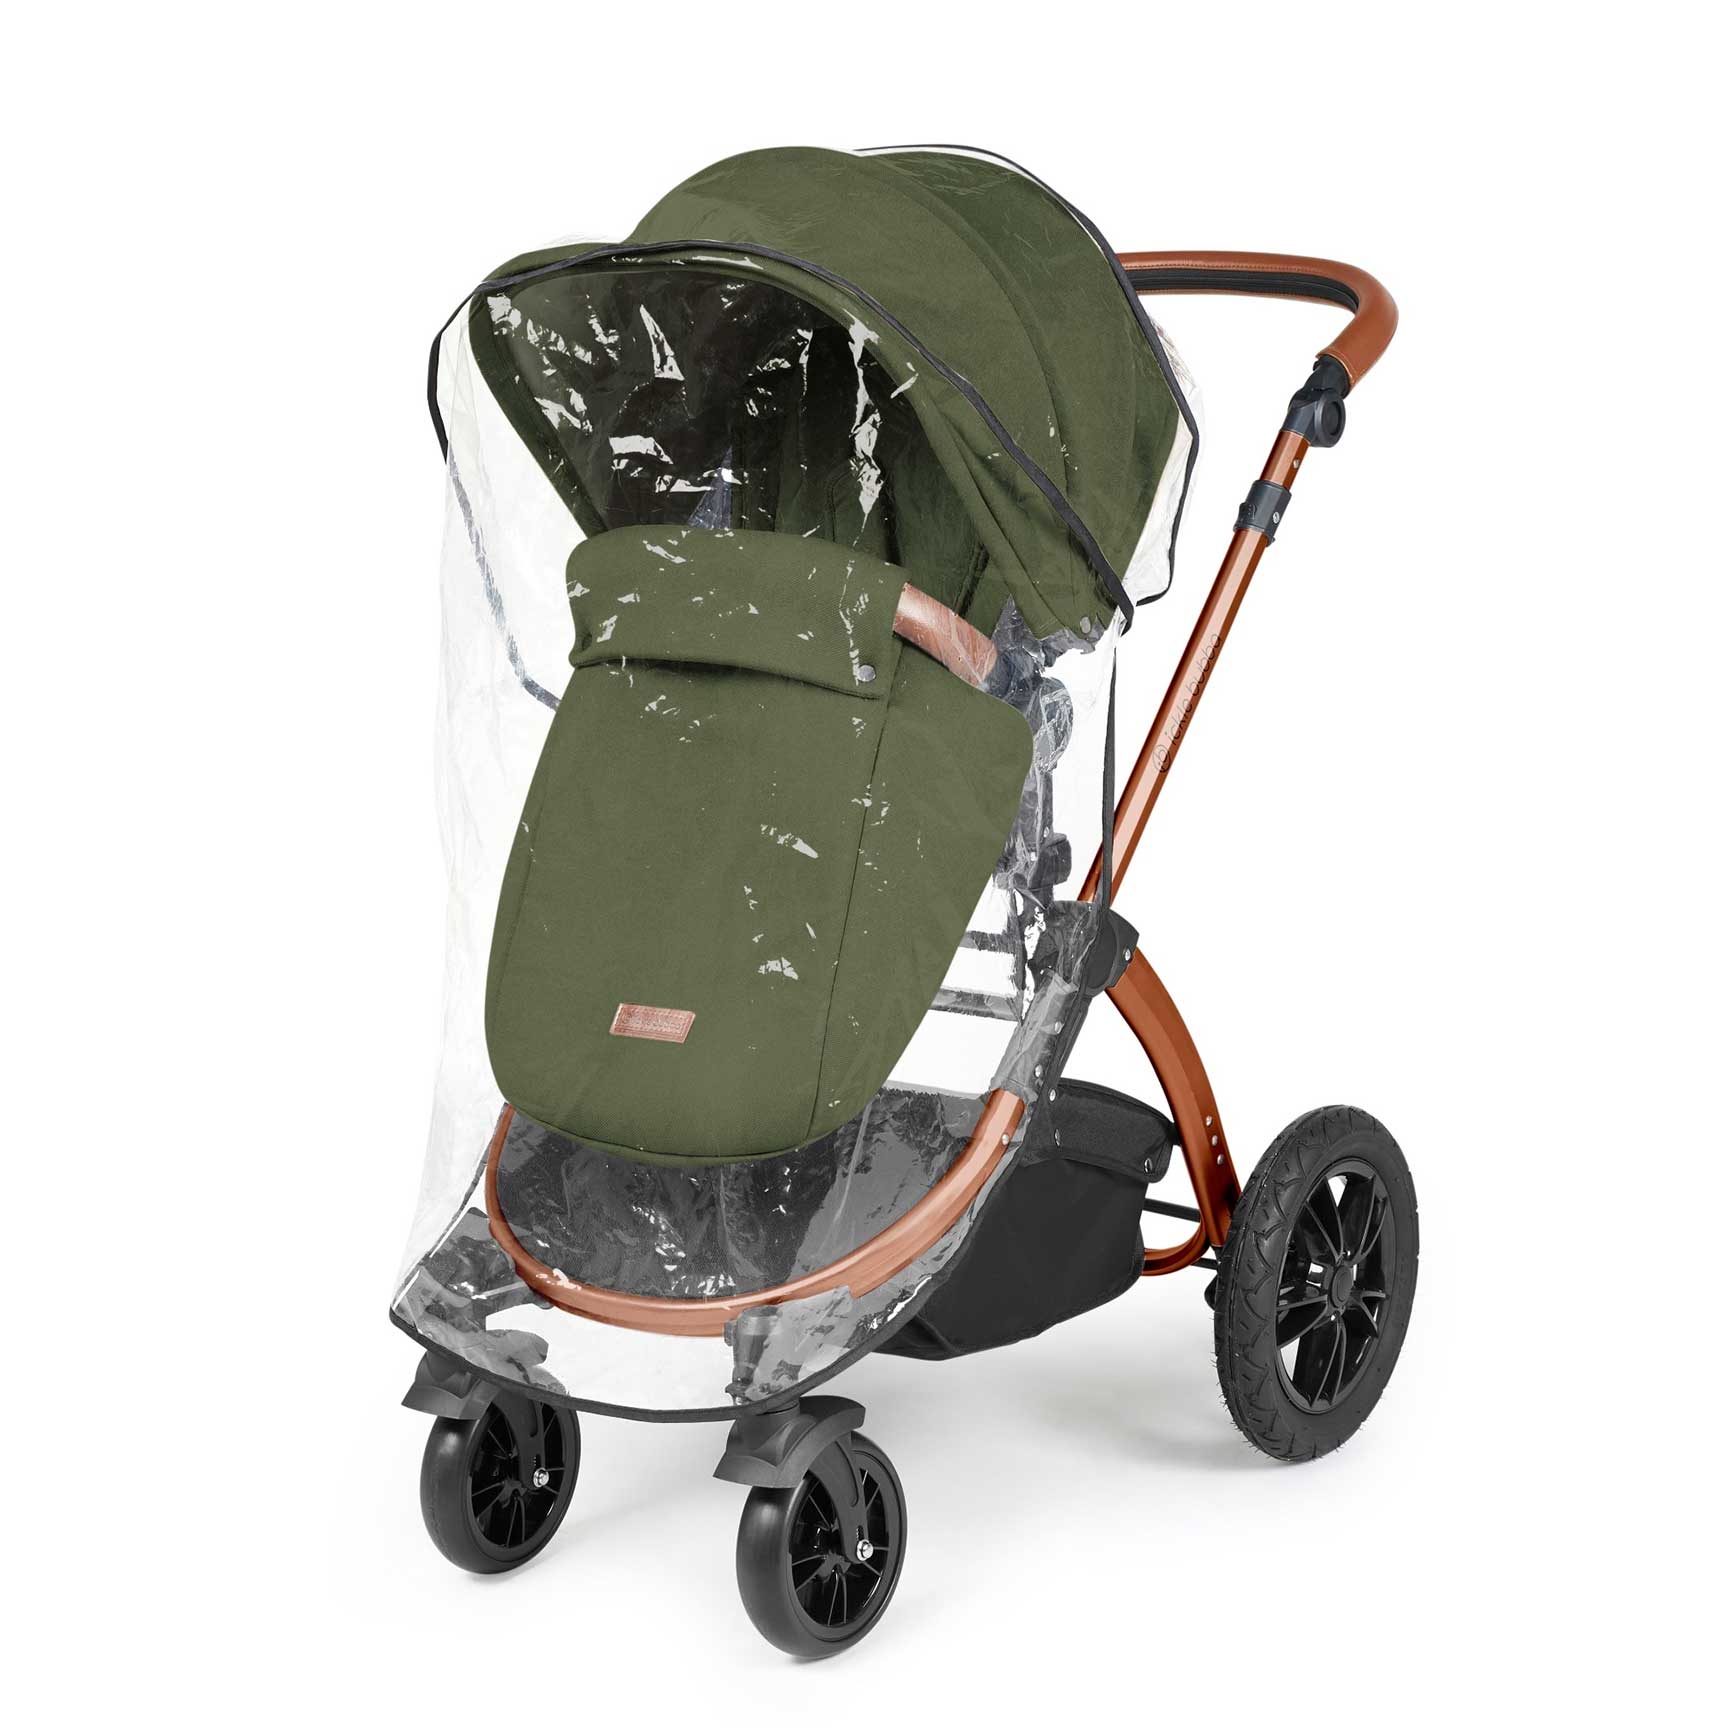 Ickle Bubba travel systems Ickle Bubba Stomp Luxe All-in-One Travel System with Isofix Base - Bronze/Woodland/Tan 10-011-300-022